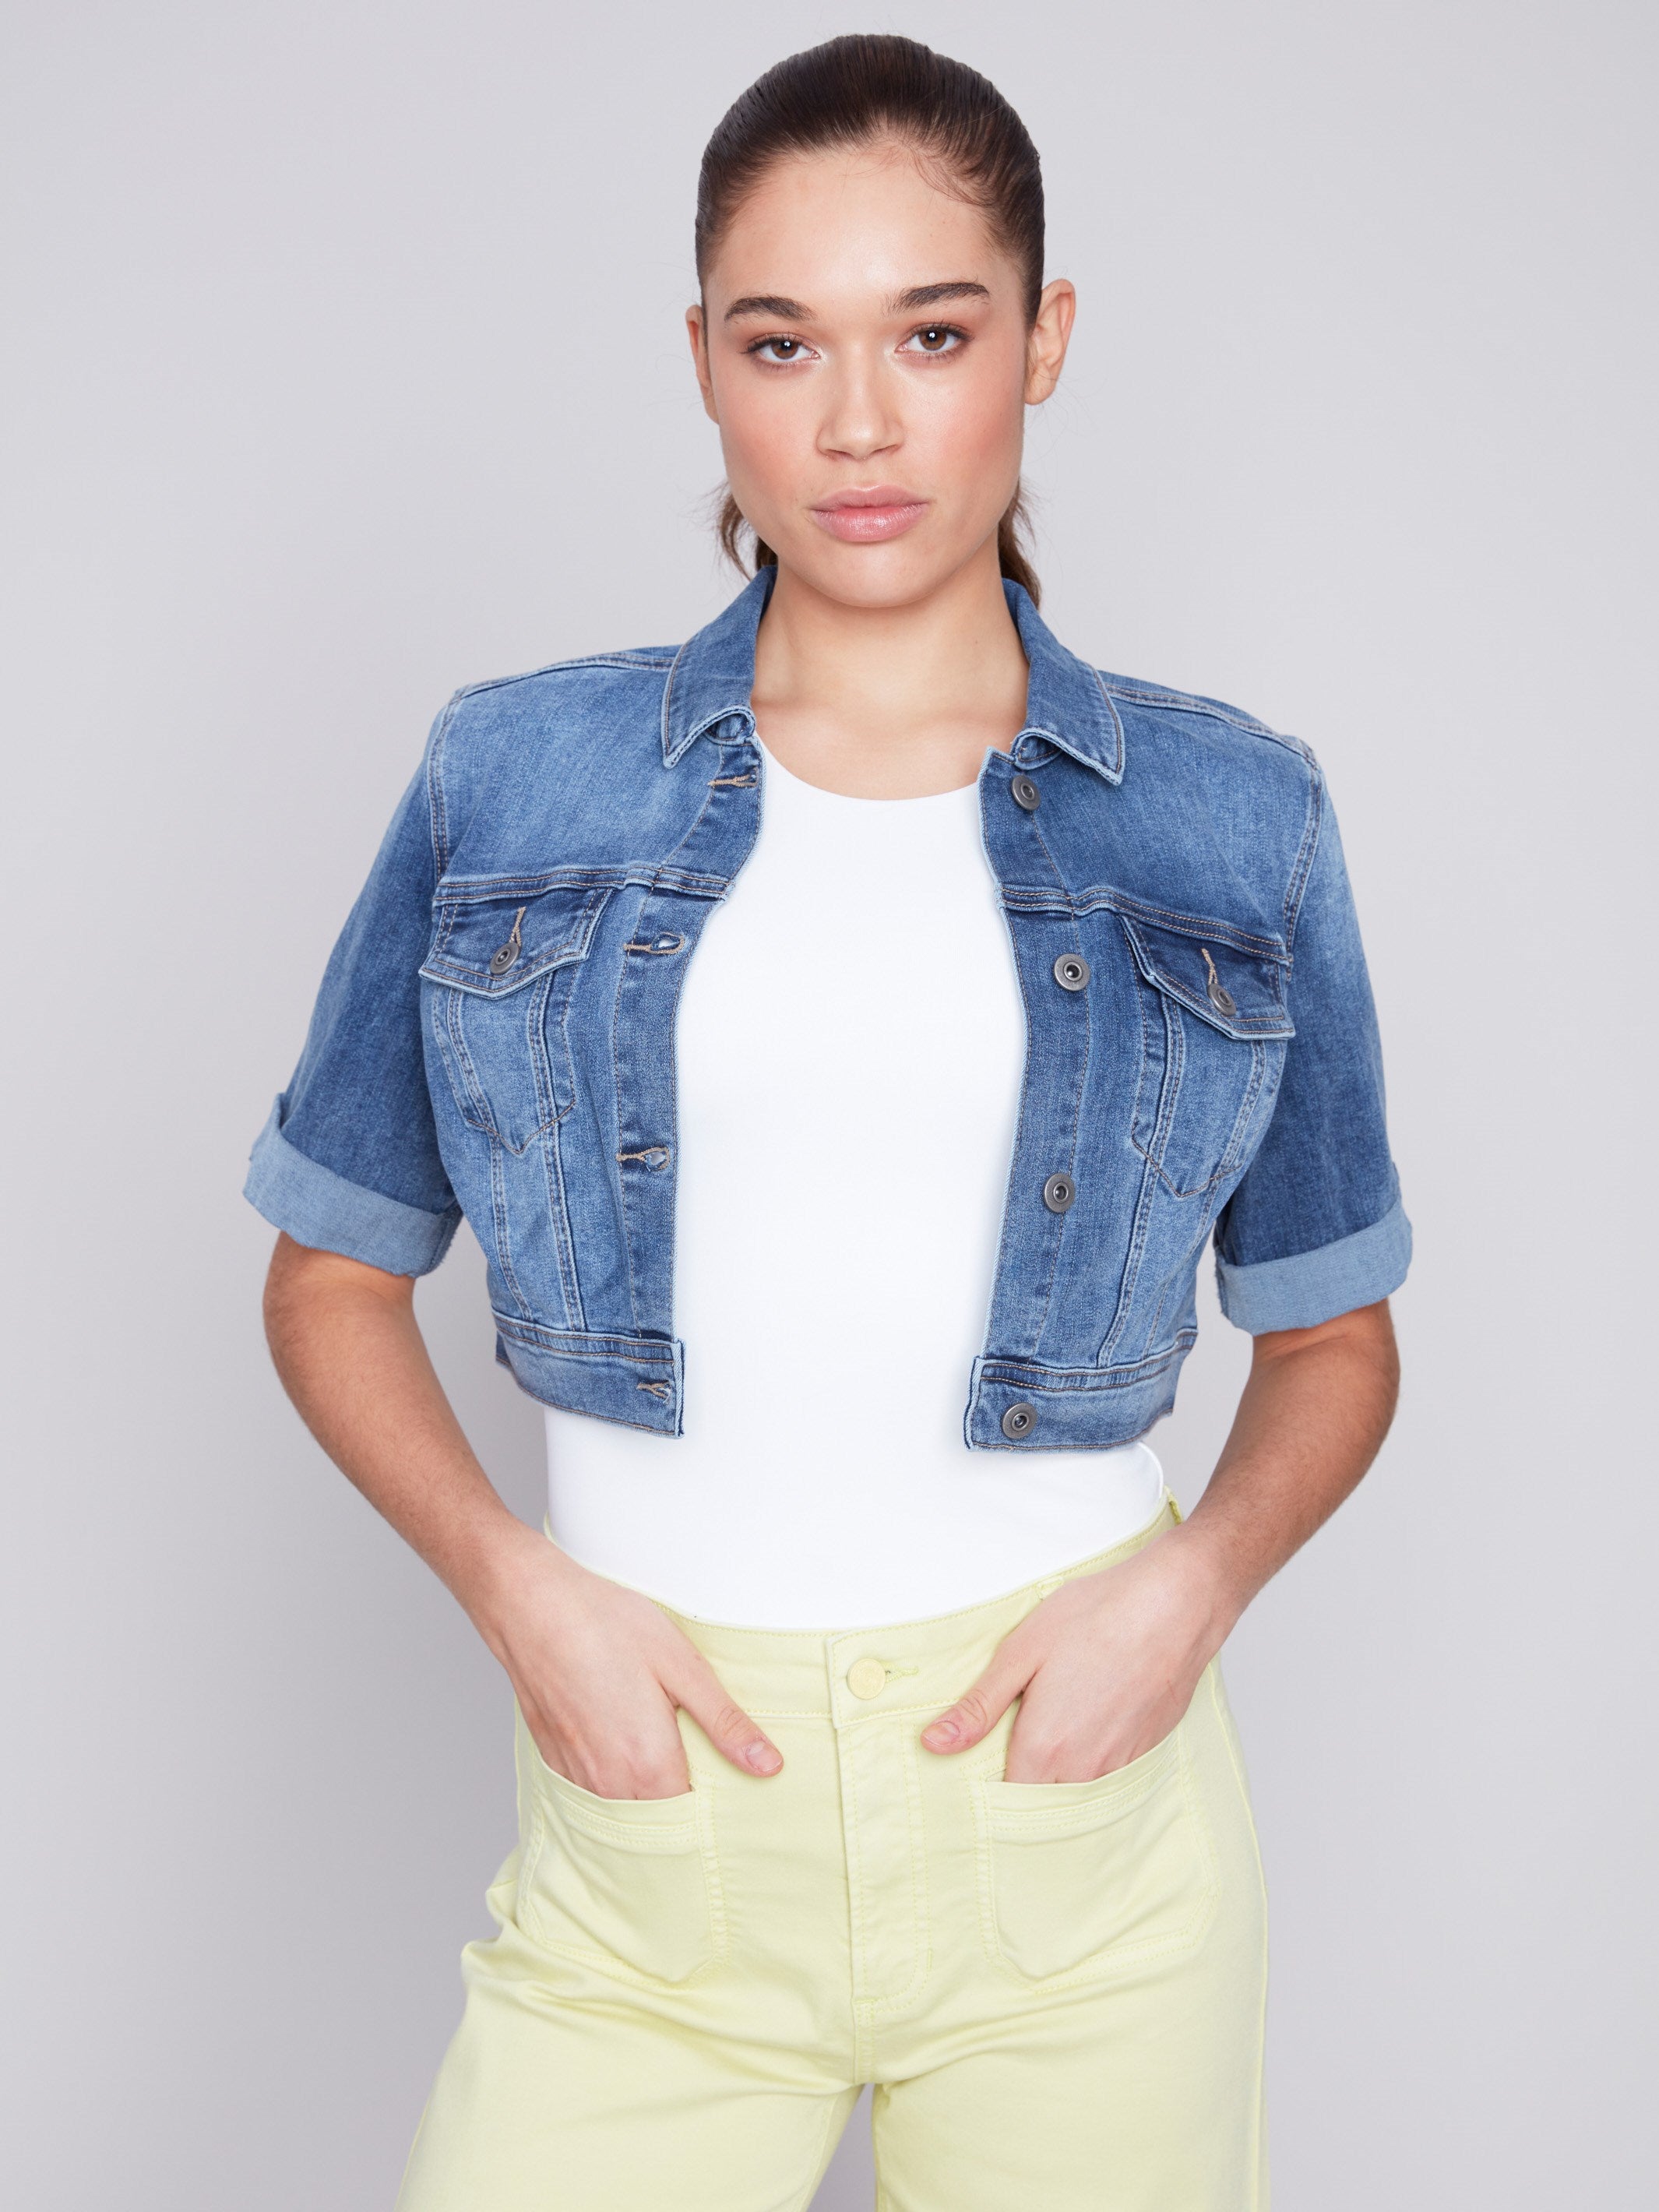 Cropped Jean Jacket - Medium Blue - Charlie B Collection Canada - Image 4